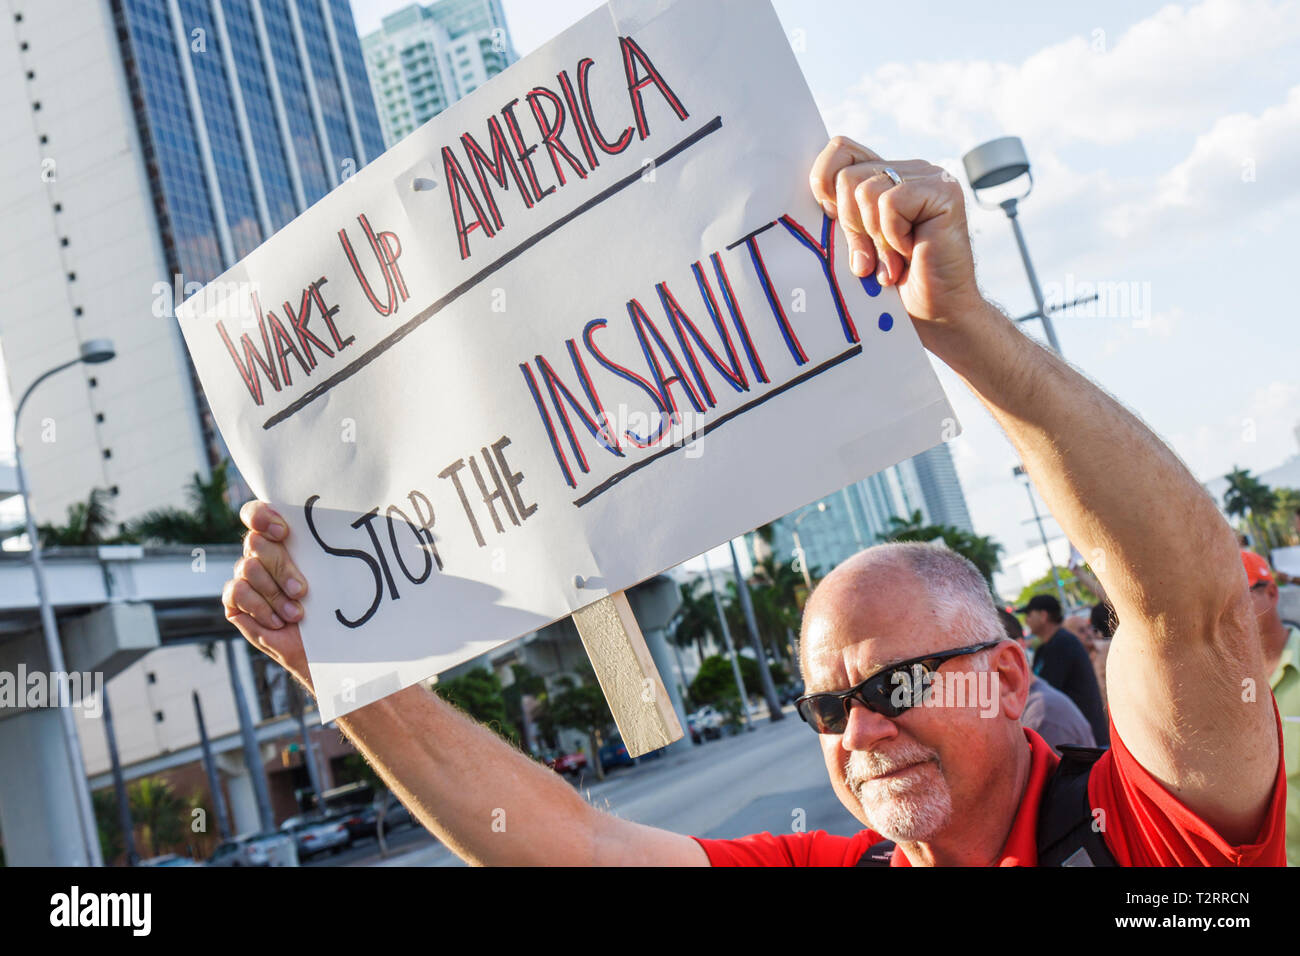 Miami Florida,Biscayne Boulevard,TEA tax party,protest,anti,government,Republican Party,right,sign,protester,free speech,opinion,dissent,man men male, Stock Photo